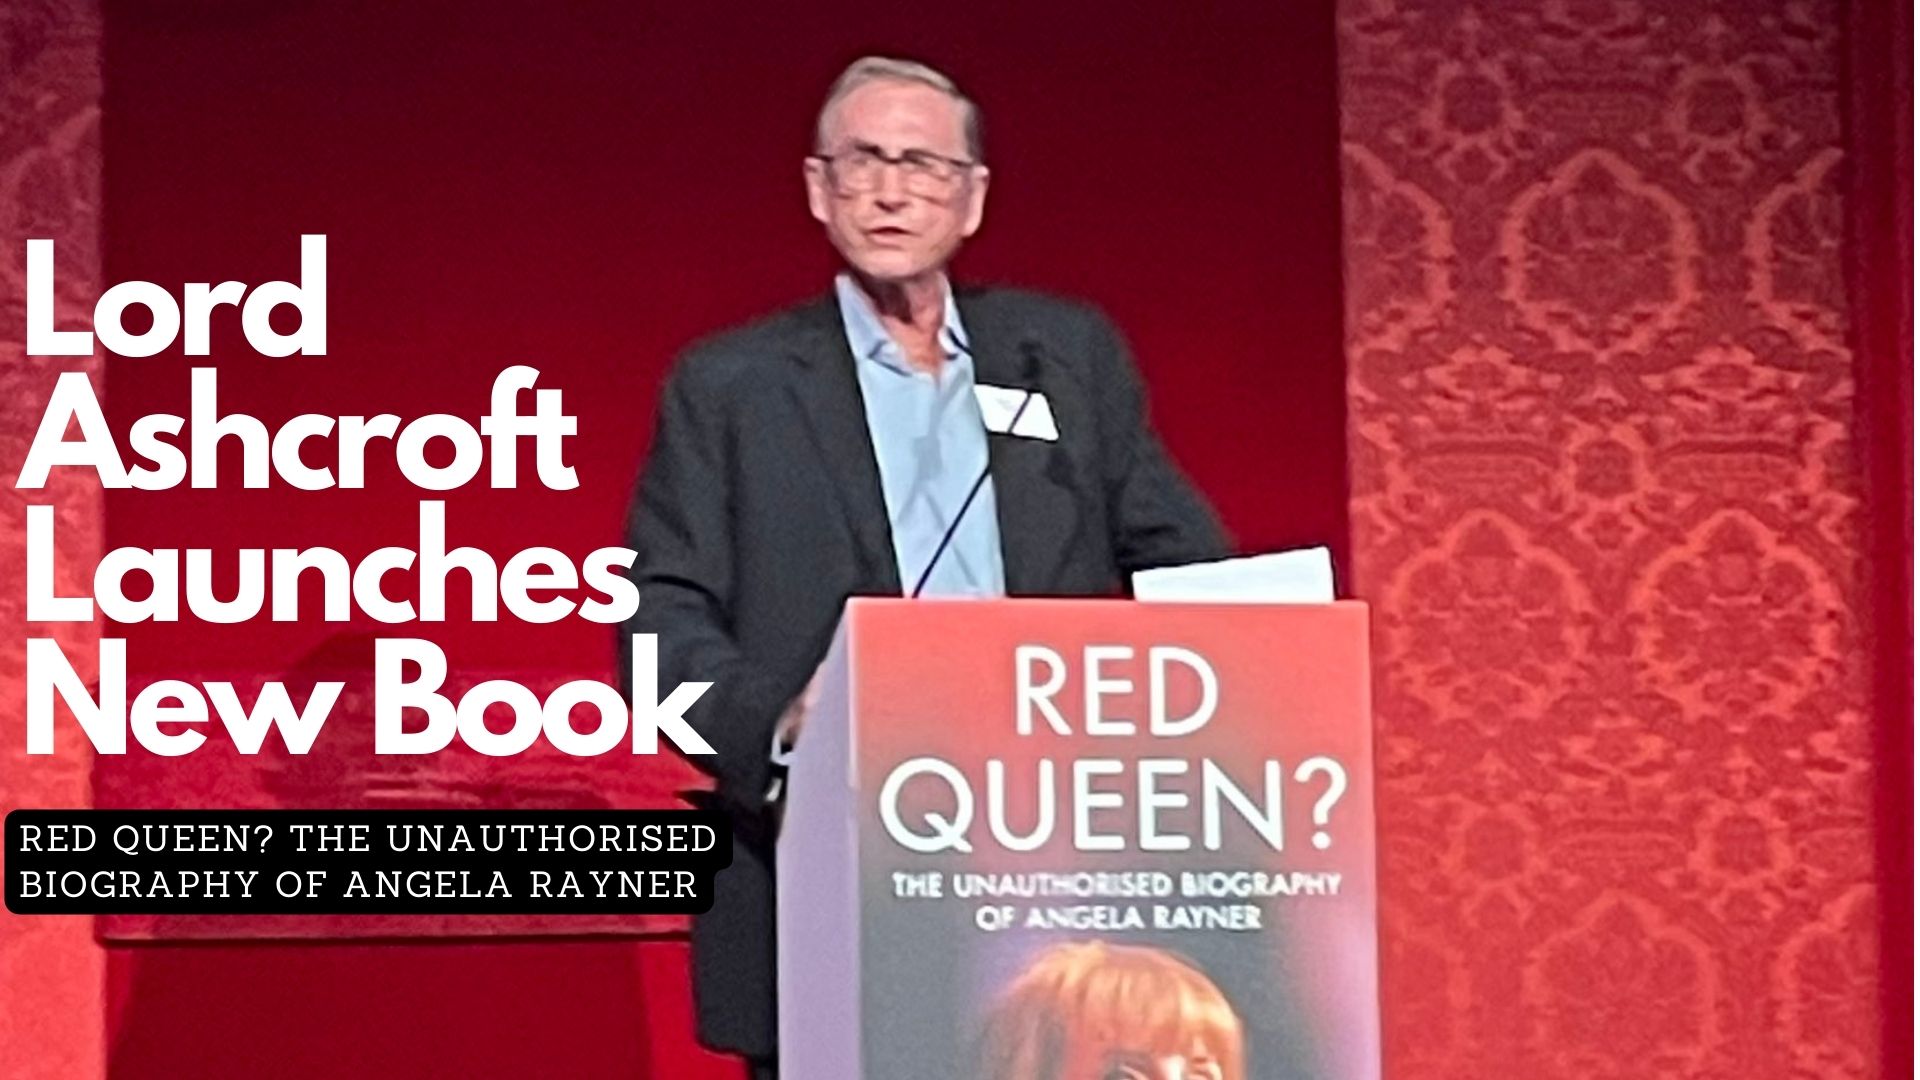 Lord Ashcroft Launches New Book, Red Queen? The Unauthorised Biography